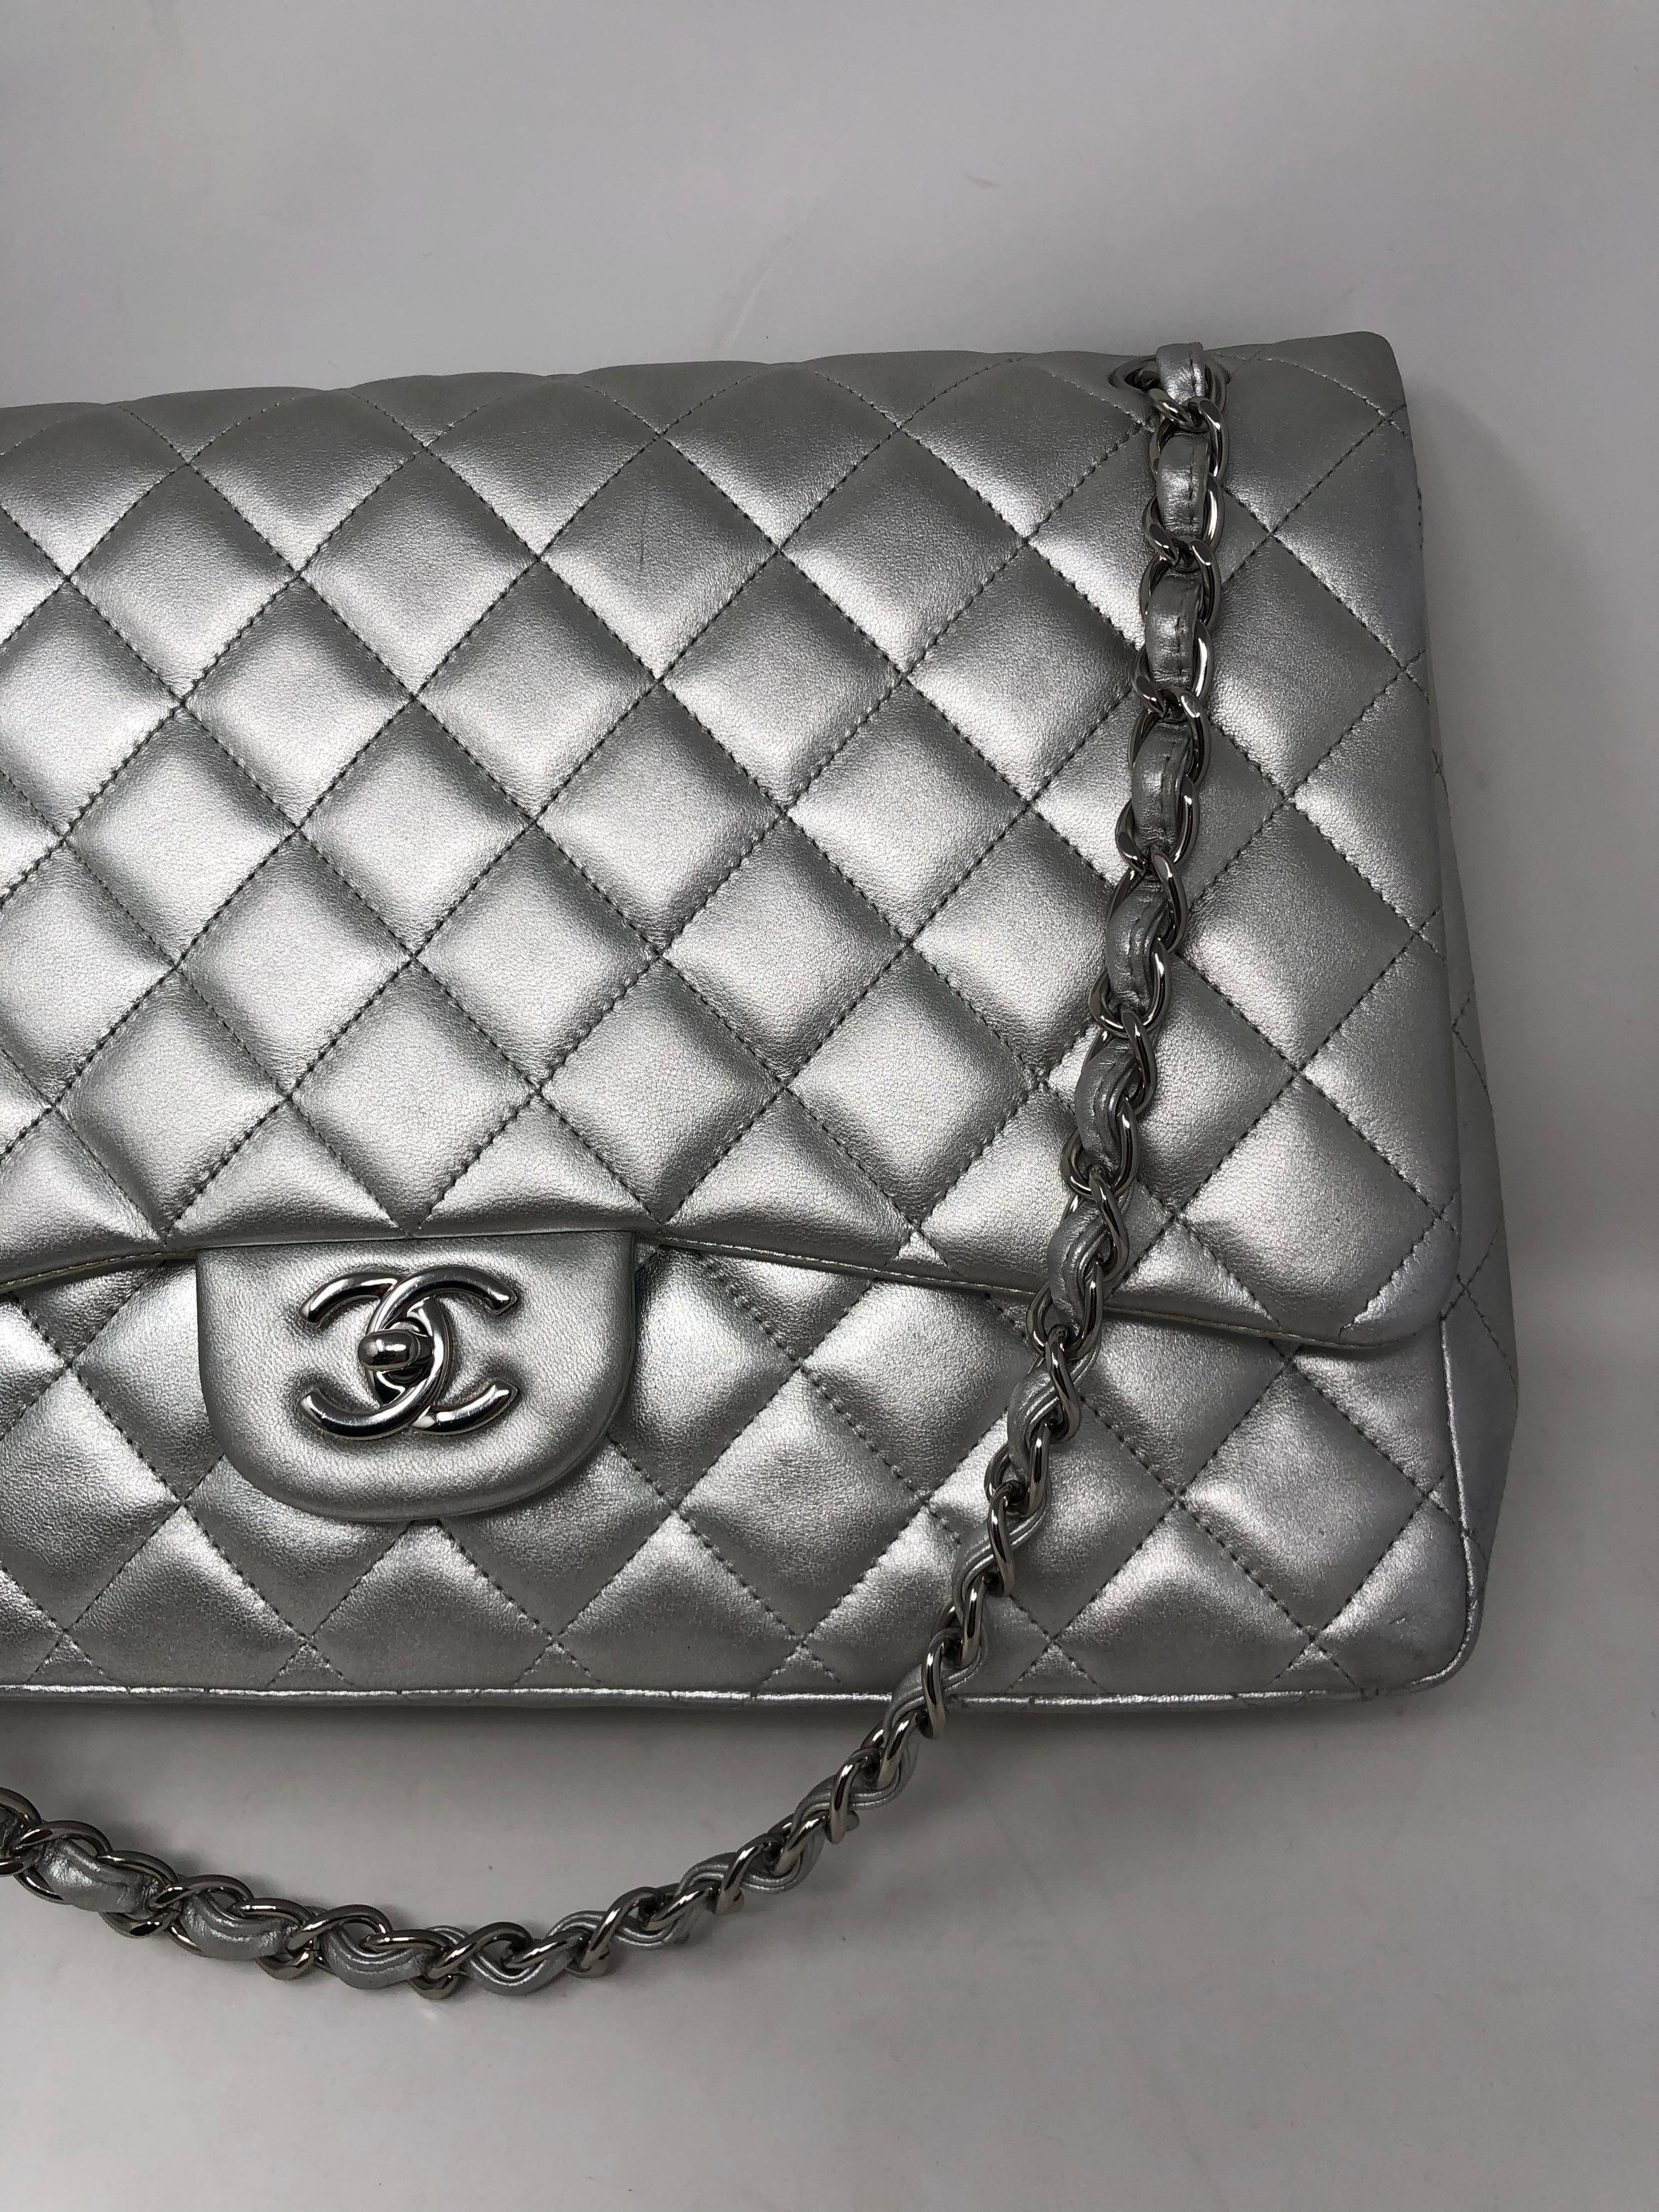 Chanel Silver Maxi Flap Bag. Lambskin metallic silver leather with silver hardware. Great condition. Maxi size 13